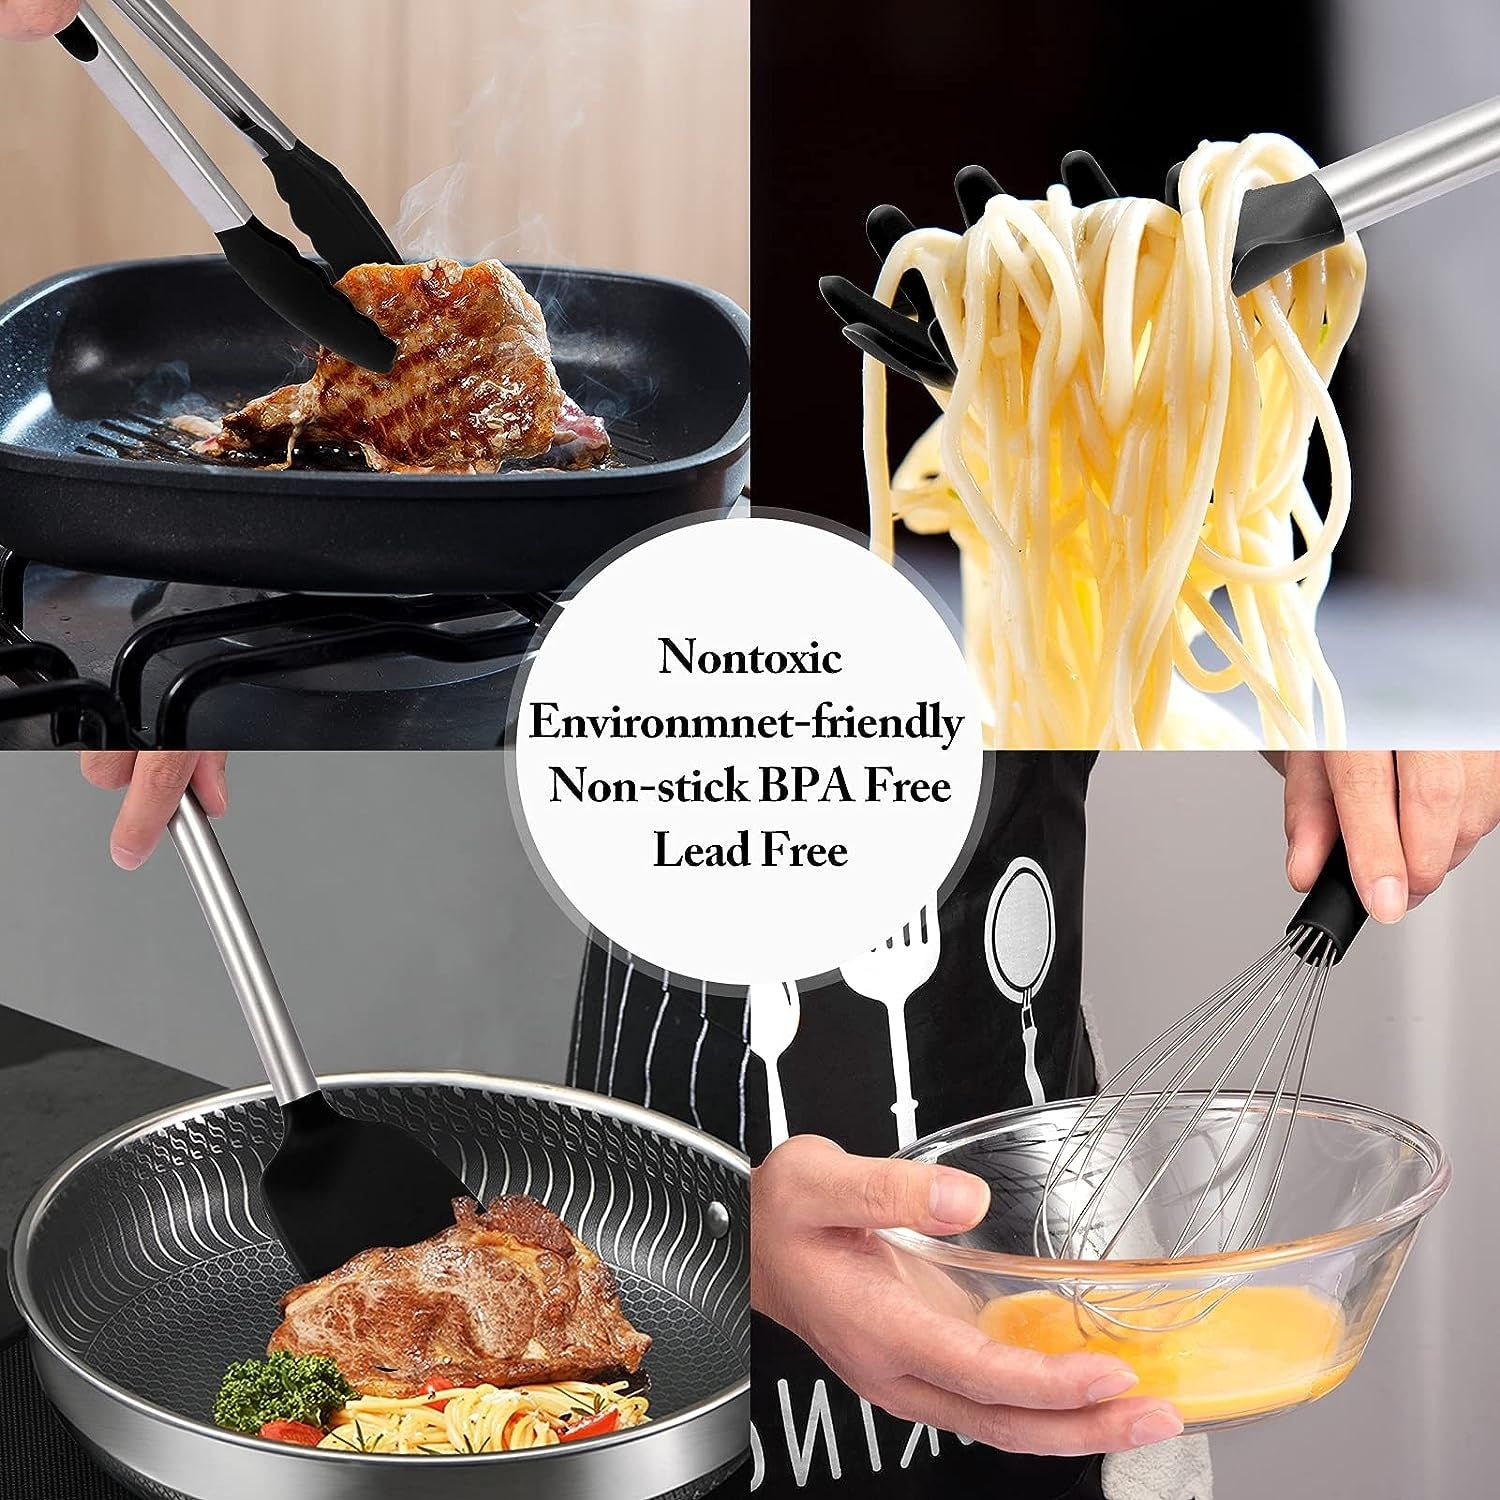 https://ak1.ostkcdn.com/images/products/is/images/direct/2ec0cafd06400bf1ef0611a9de428e2b730b6e5f/Kitchen-Utensils-Set-with-Holder%2C-Silicone-Cooking-Utensils-Gadget.jpg